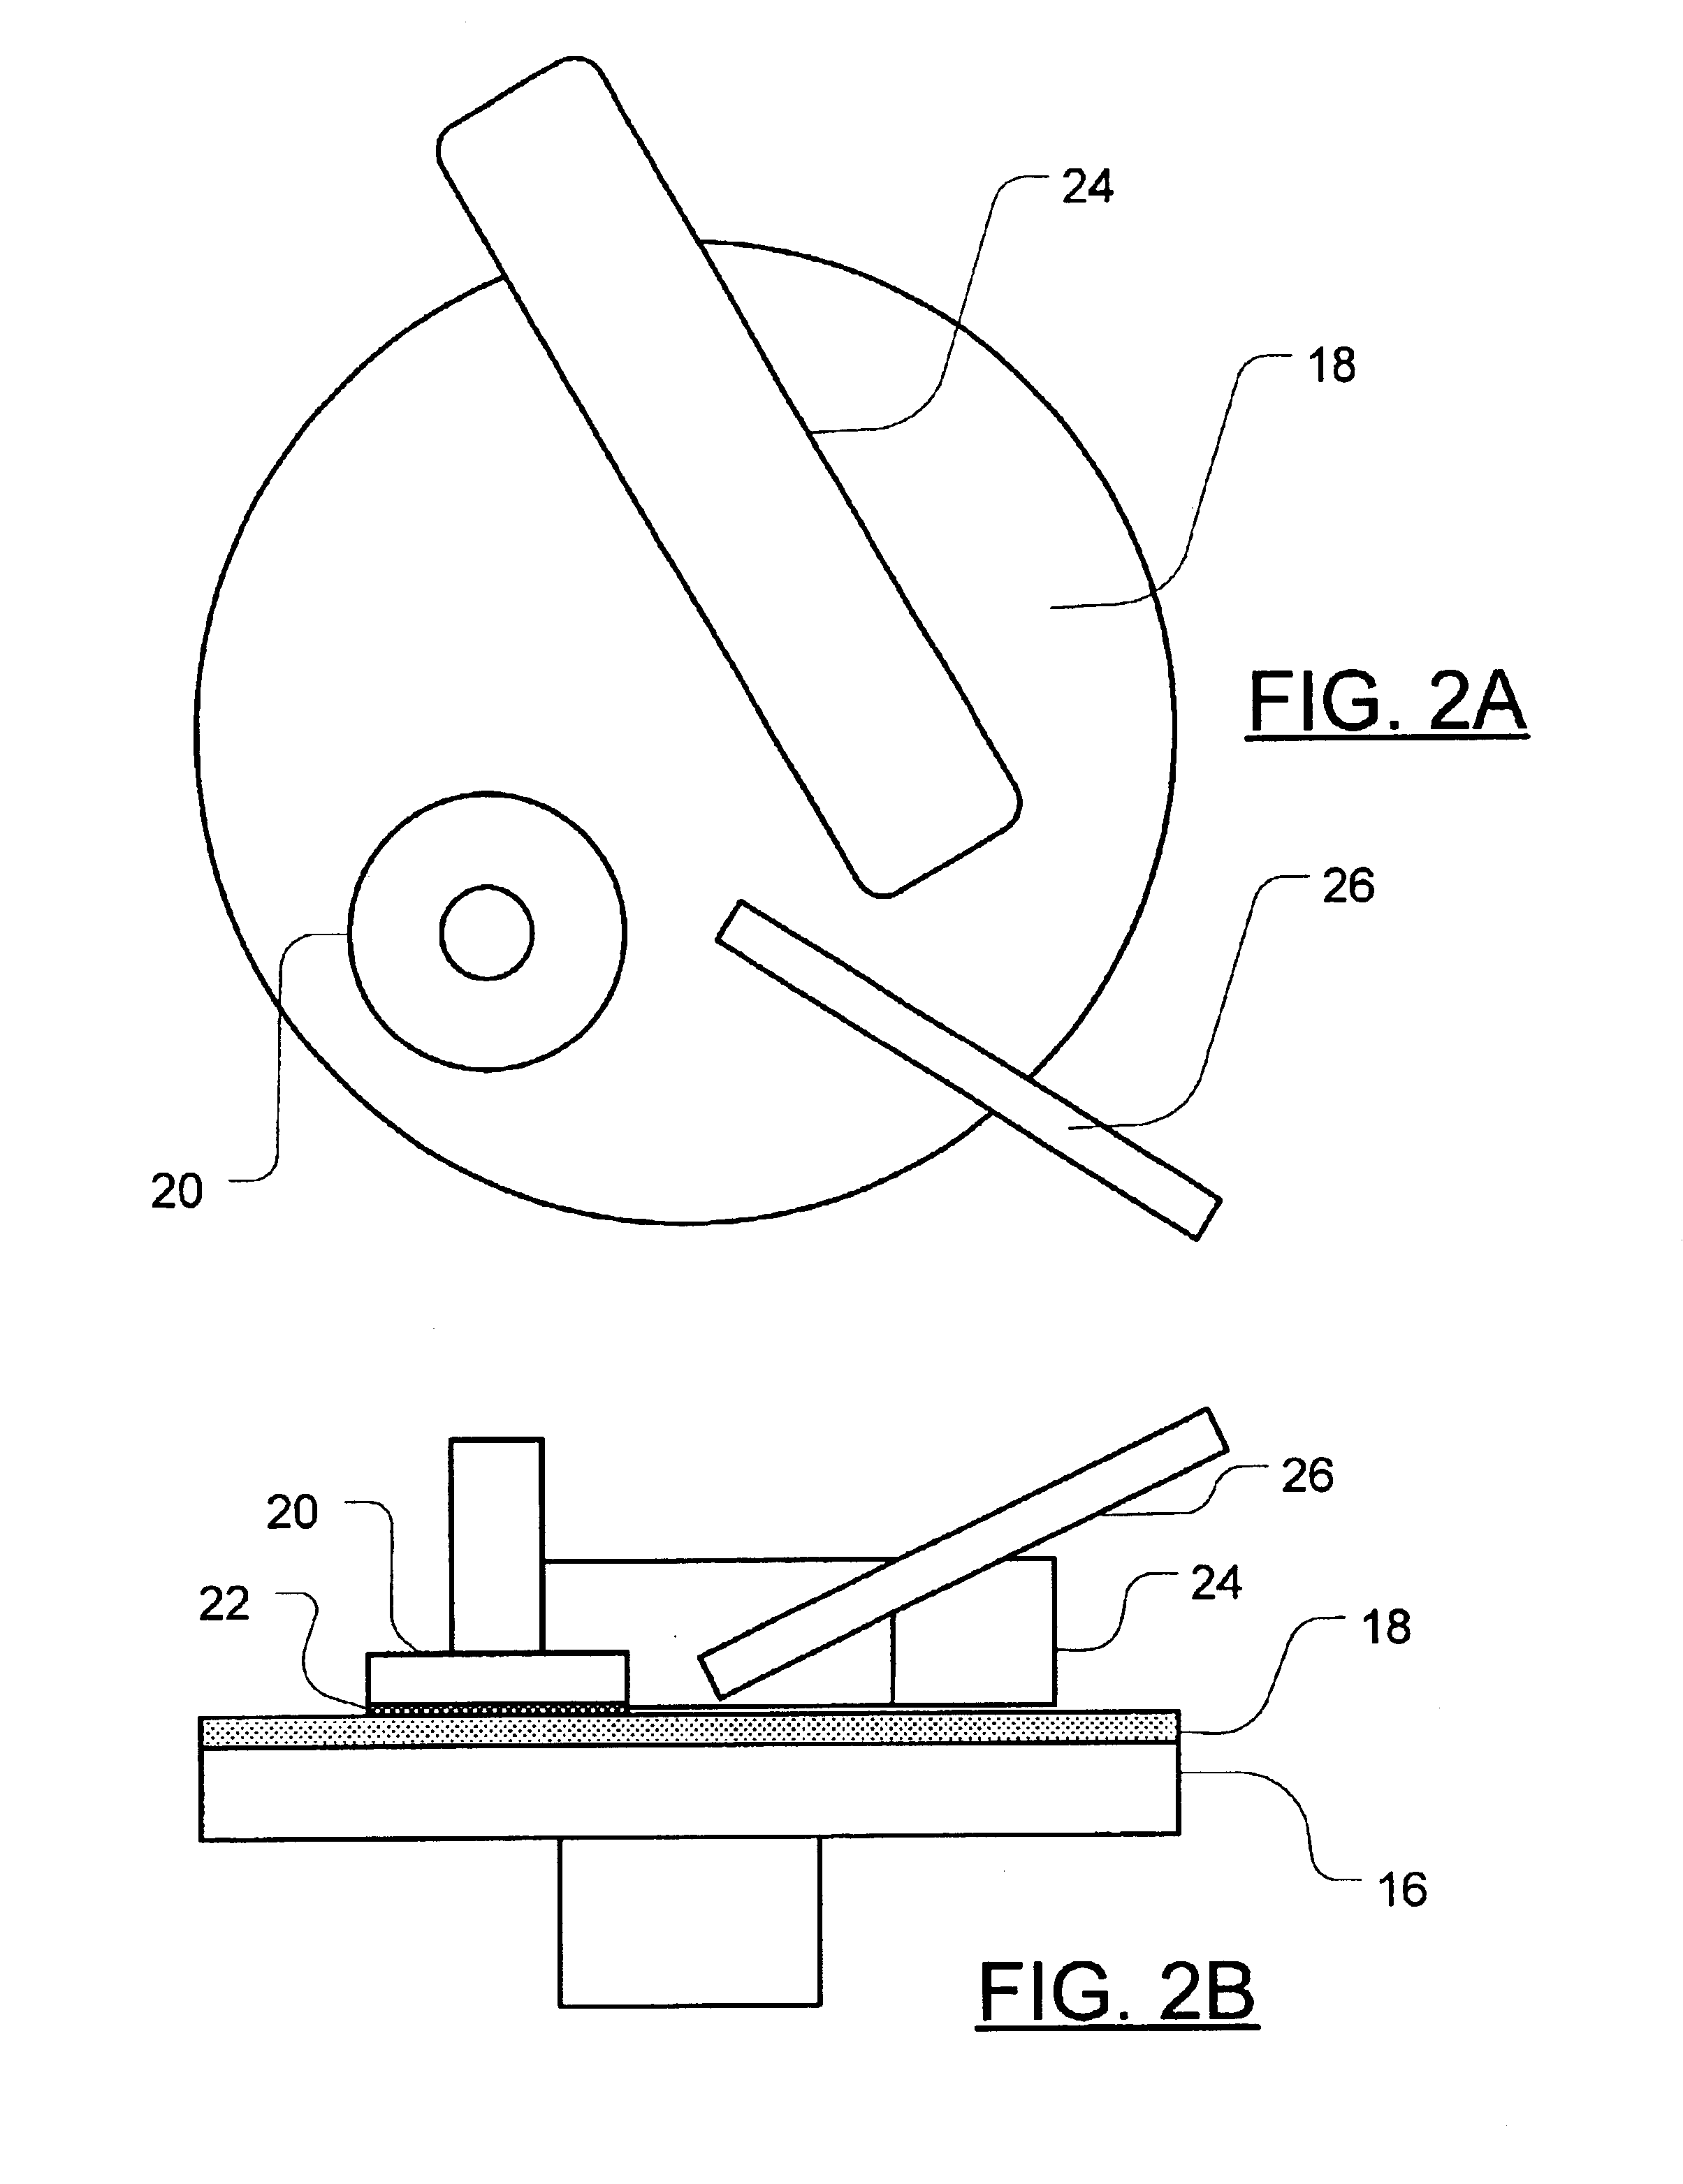 Method of manufacturing a fixed abrasive material